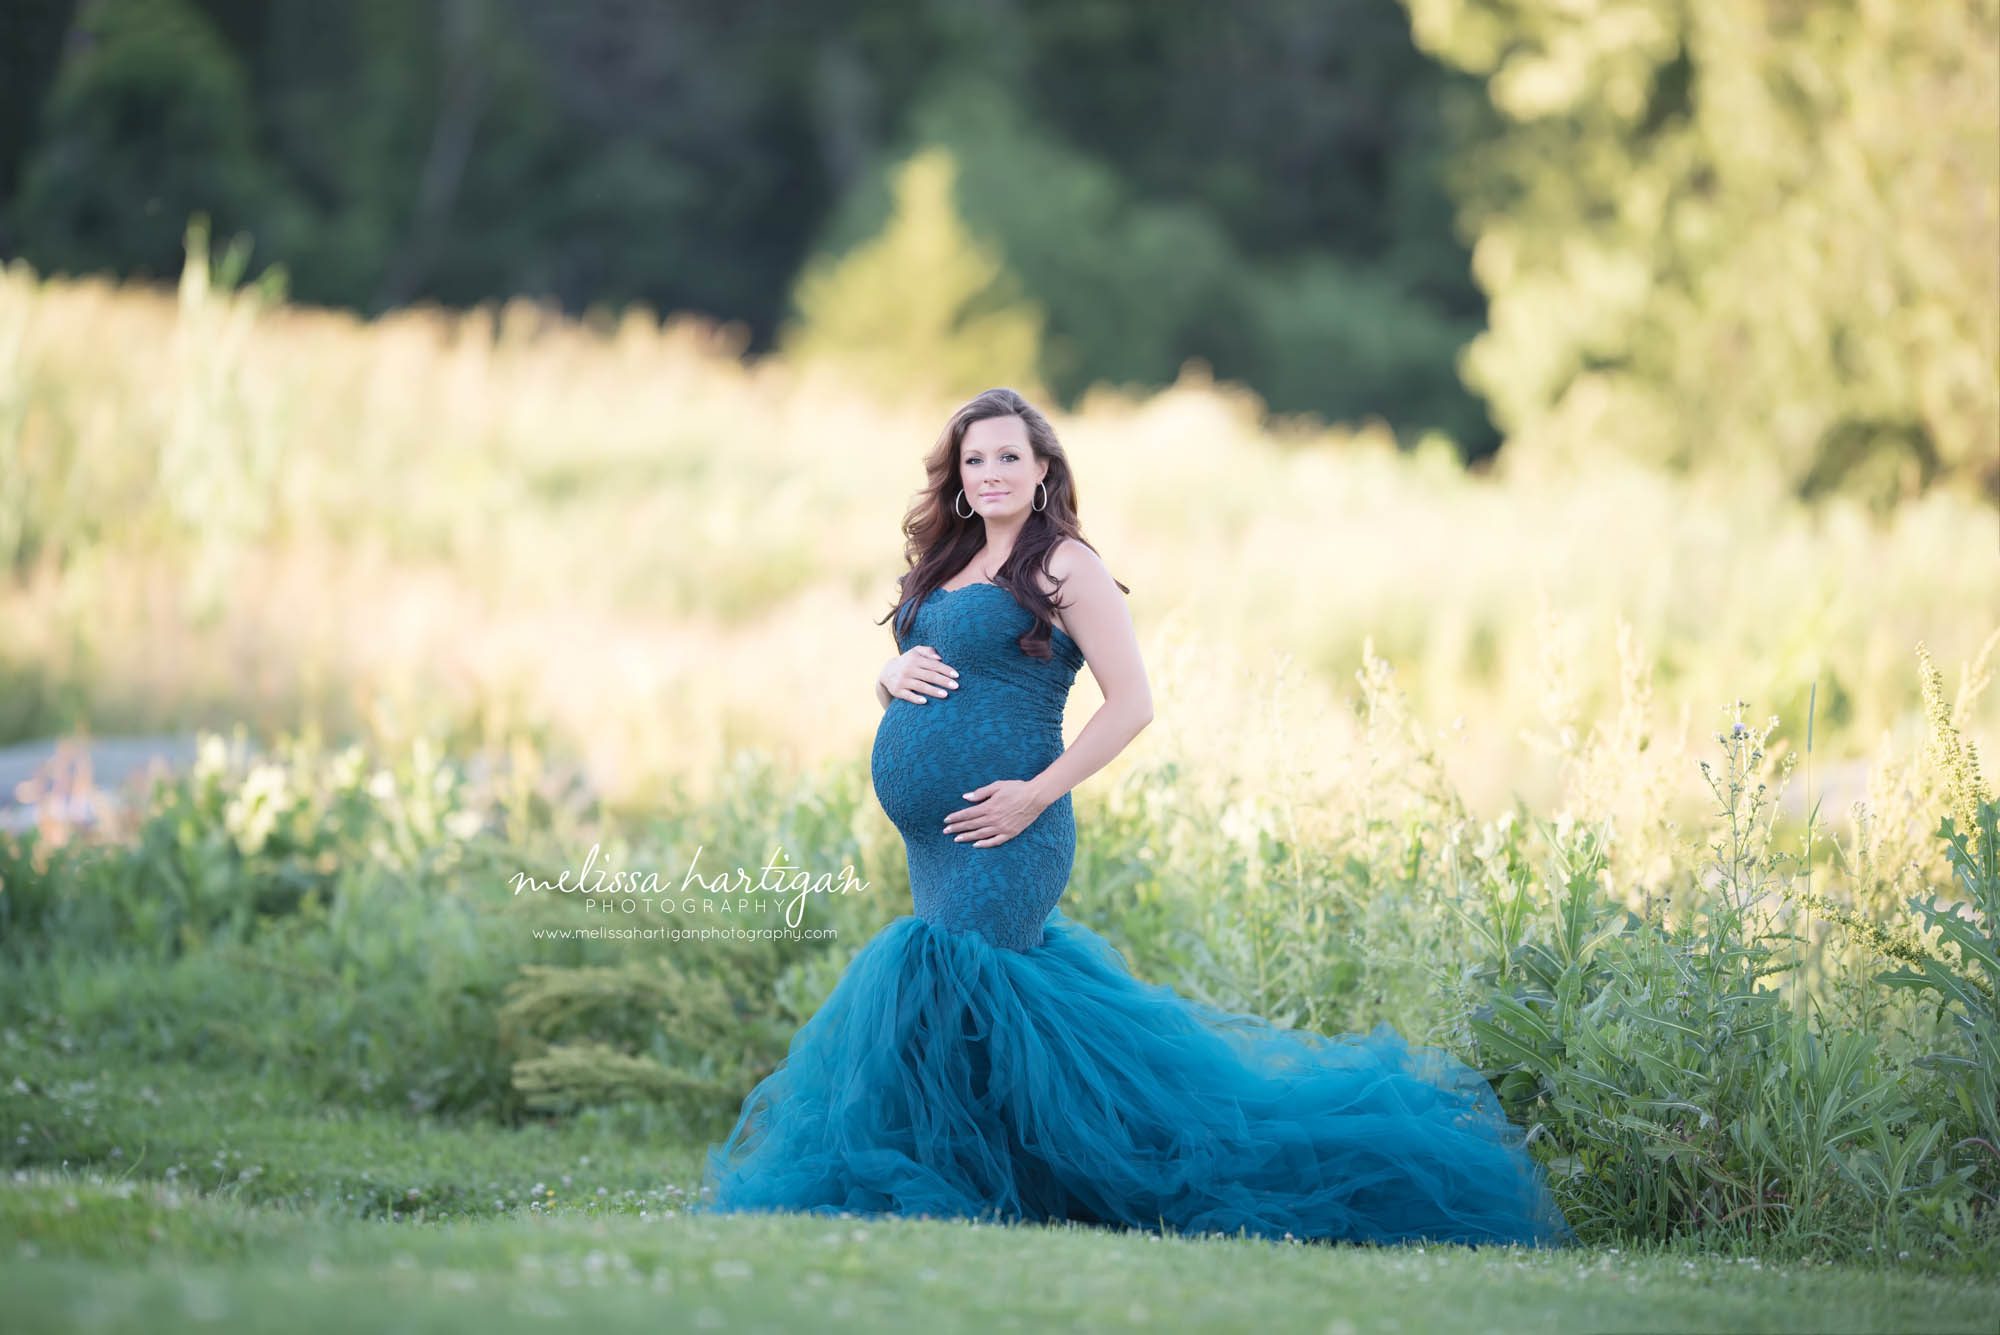 Melissa Hartigan Photography Connecticut Best Maternity Photographer in CT Coventry Ct Middlefield CT baby Fairfield county Newborn and maternity CT photographer Maternity photographer Mommy-to-be outdoor session wearing blue lace and tulle dress in field holding belly